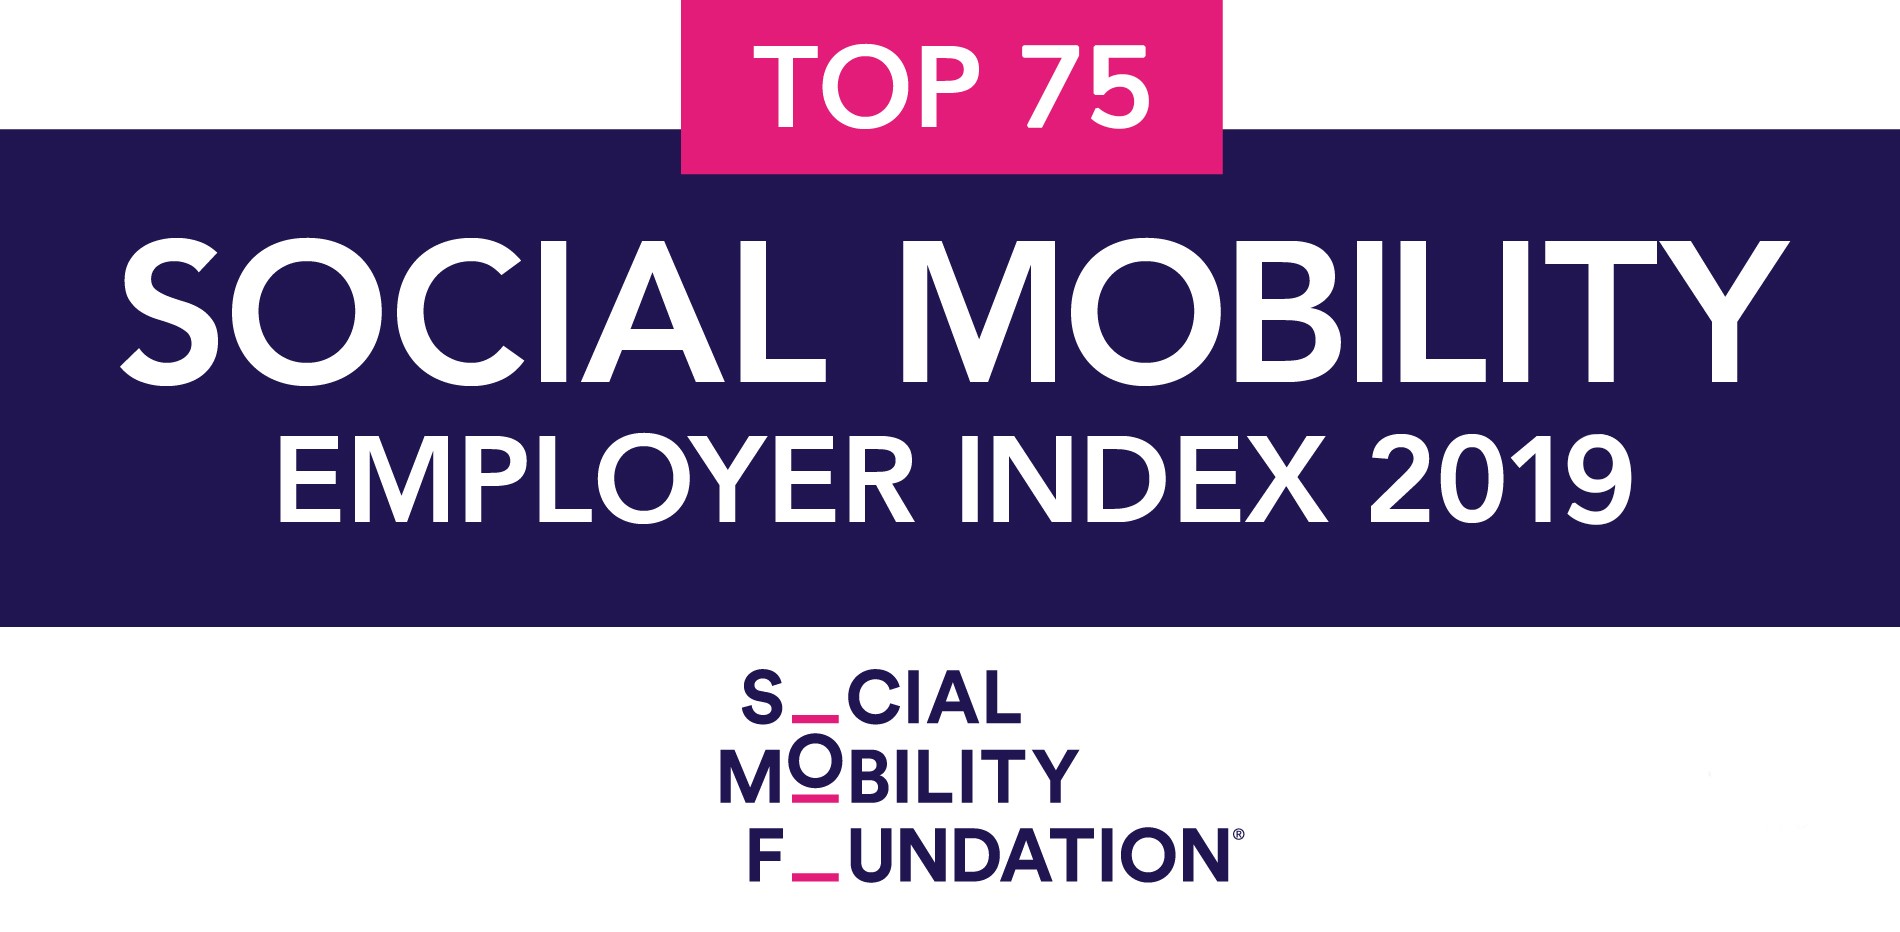 Enterprise ranked as a top Social Mobility Employer for third year running